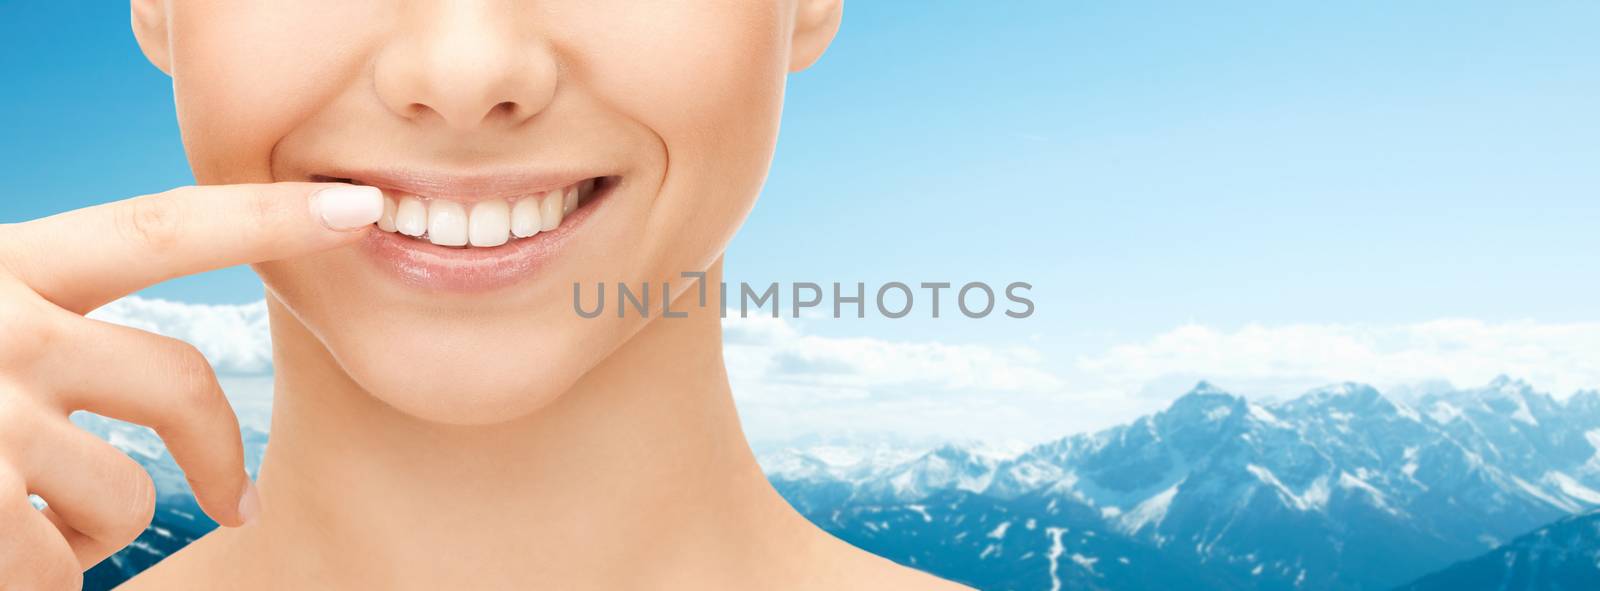 dental health, beauty, hygiene and people concept - close up of smiling woman face pointing to teeth over blue mountains background